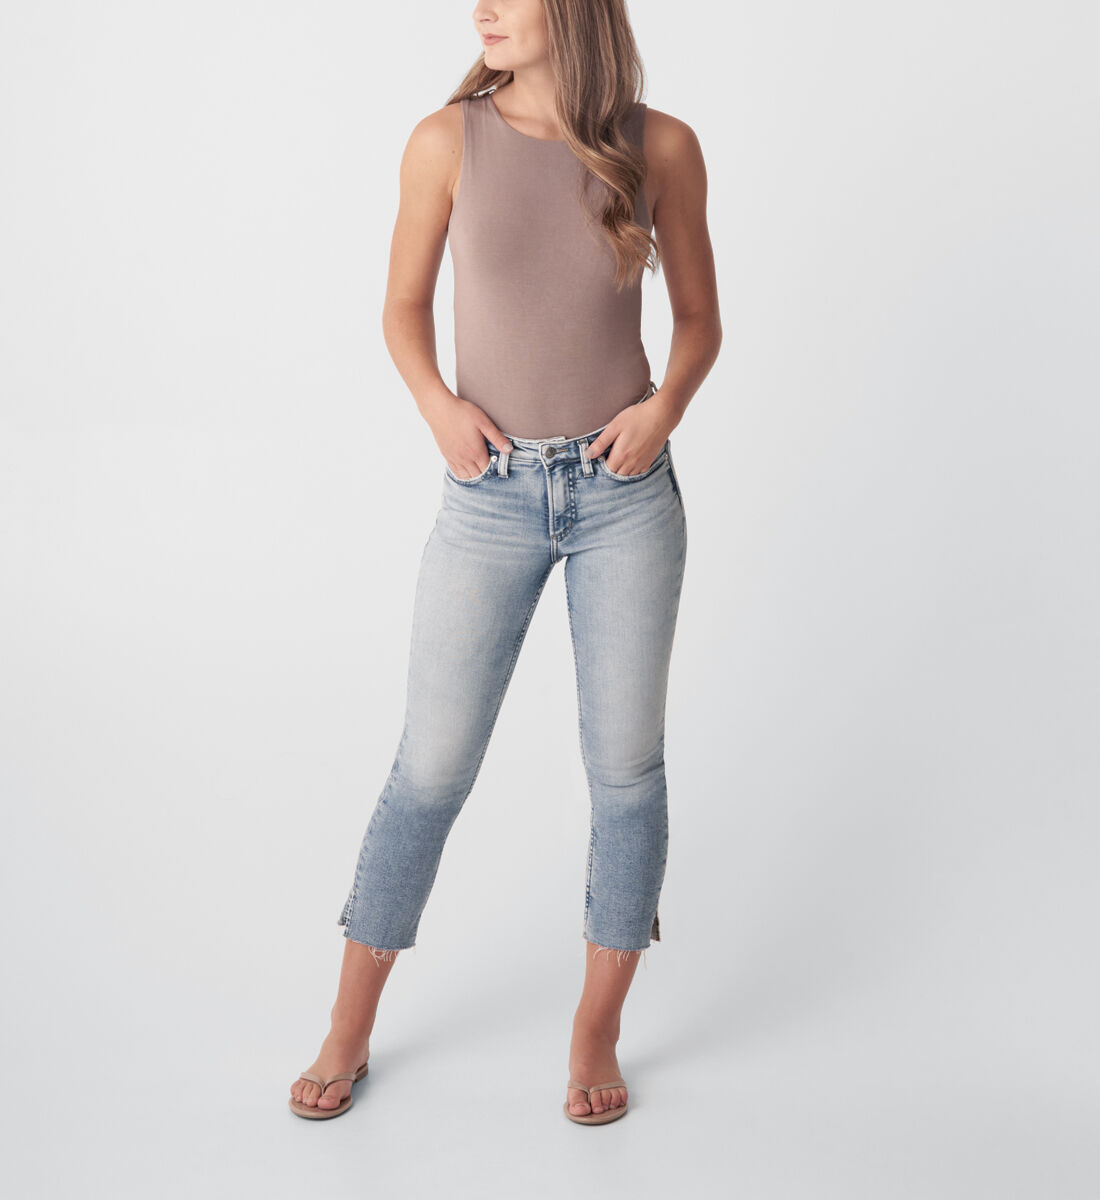 Buy Most Wanted Mid Rise Straight Crop Jeans for USD 37.00 